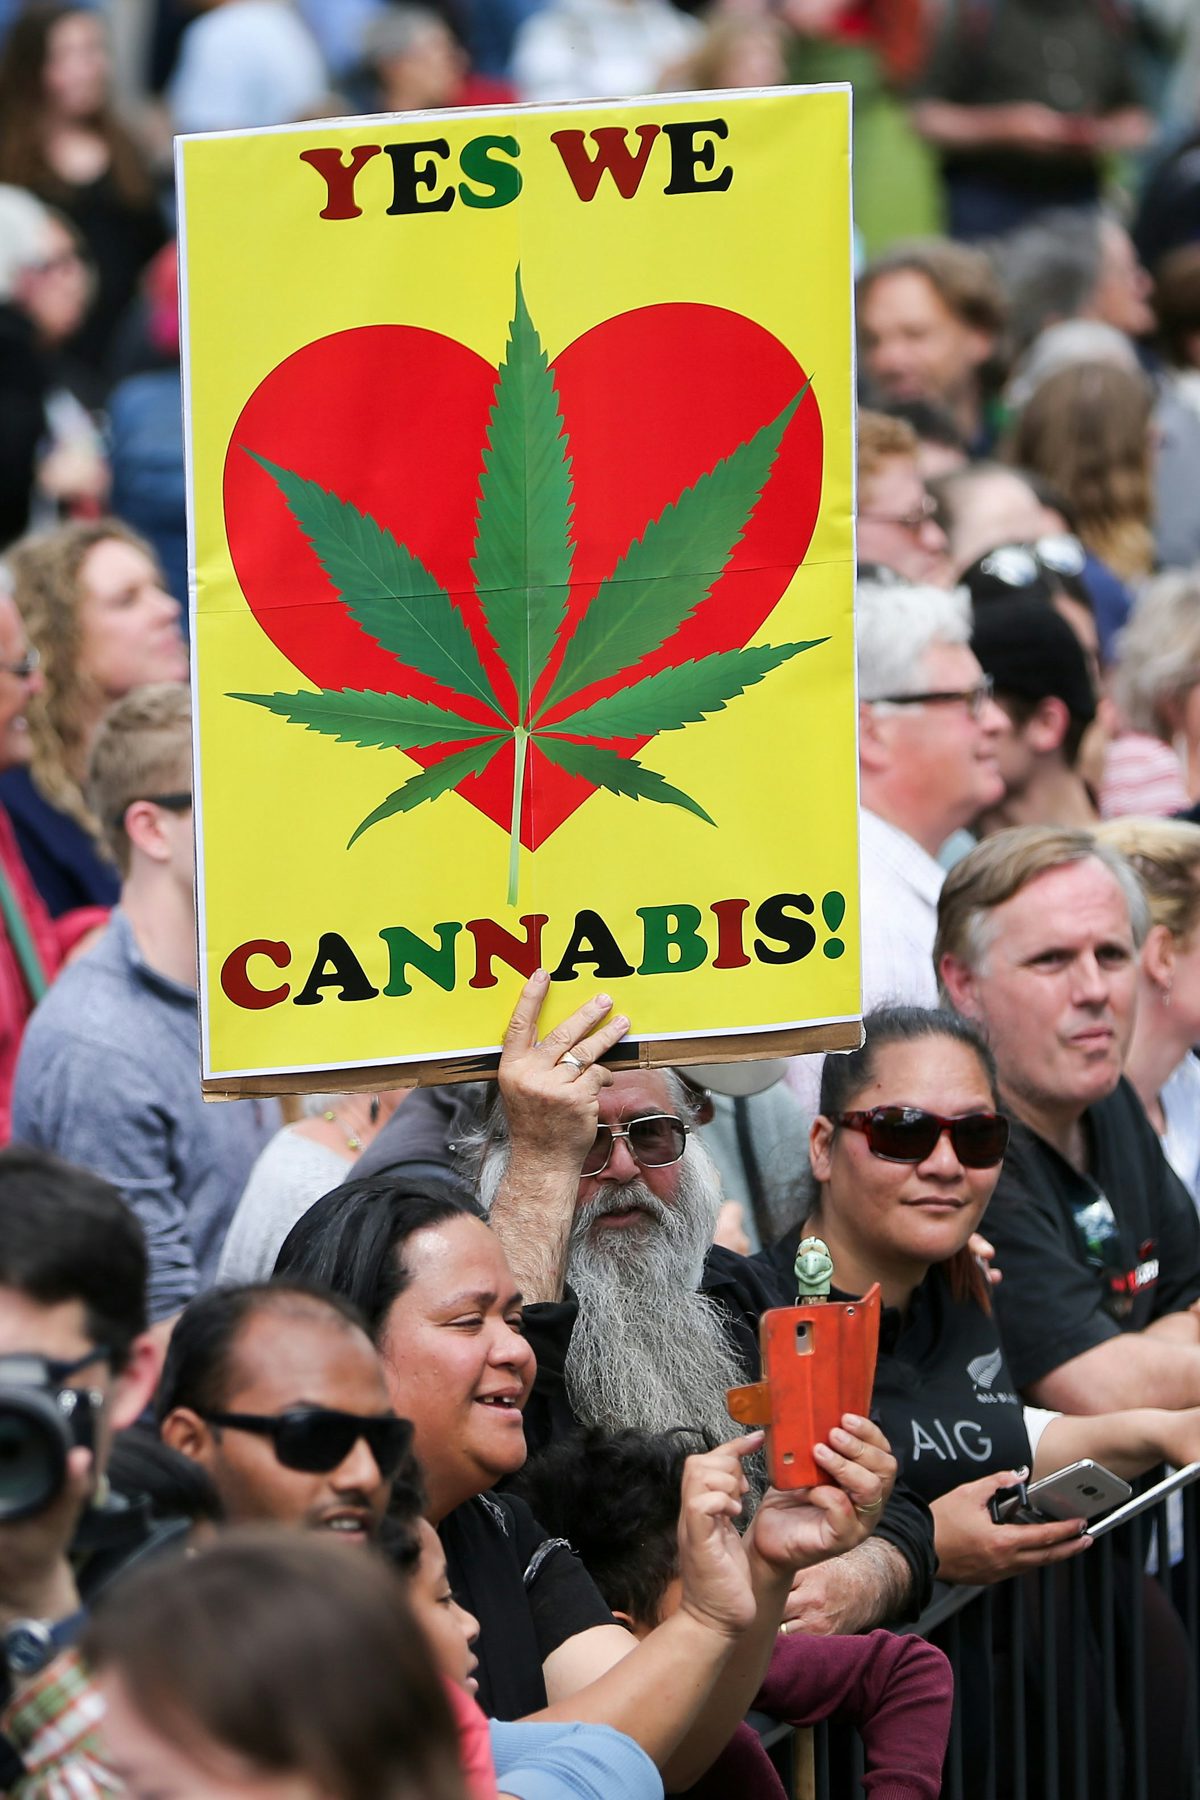 New Zealand may legalize recreational cannabis 2 of 2 New Zealand Is A Step Closer To Legalizing Recreational Cannabis